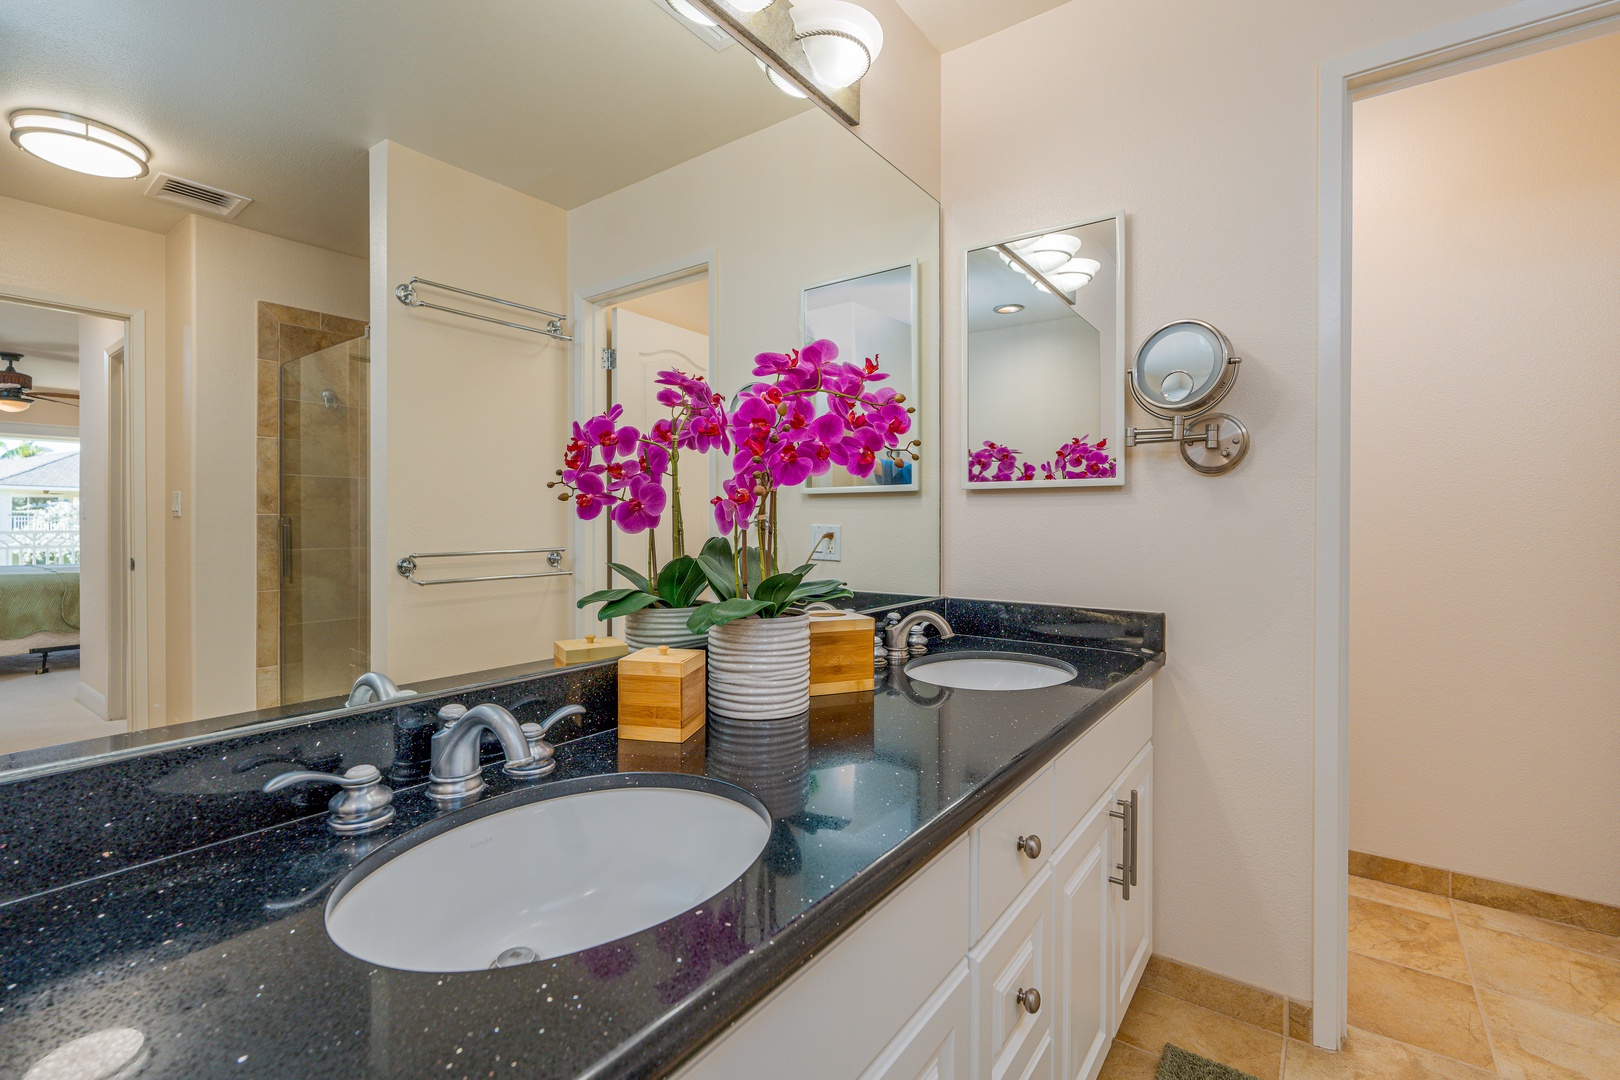 Kapolei Vacation Rentals, Ko Olina Kai 1097C - Comes with an ensuite bathroom with dual sinks.